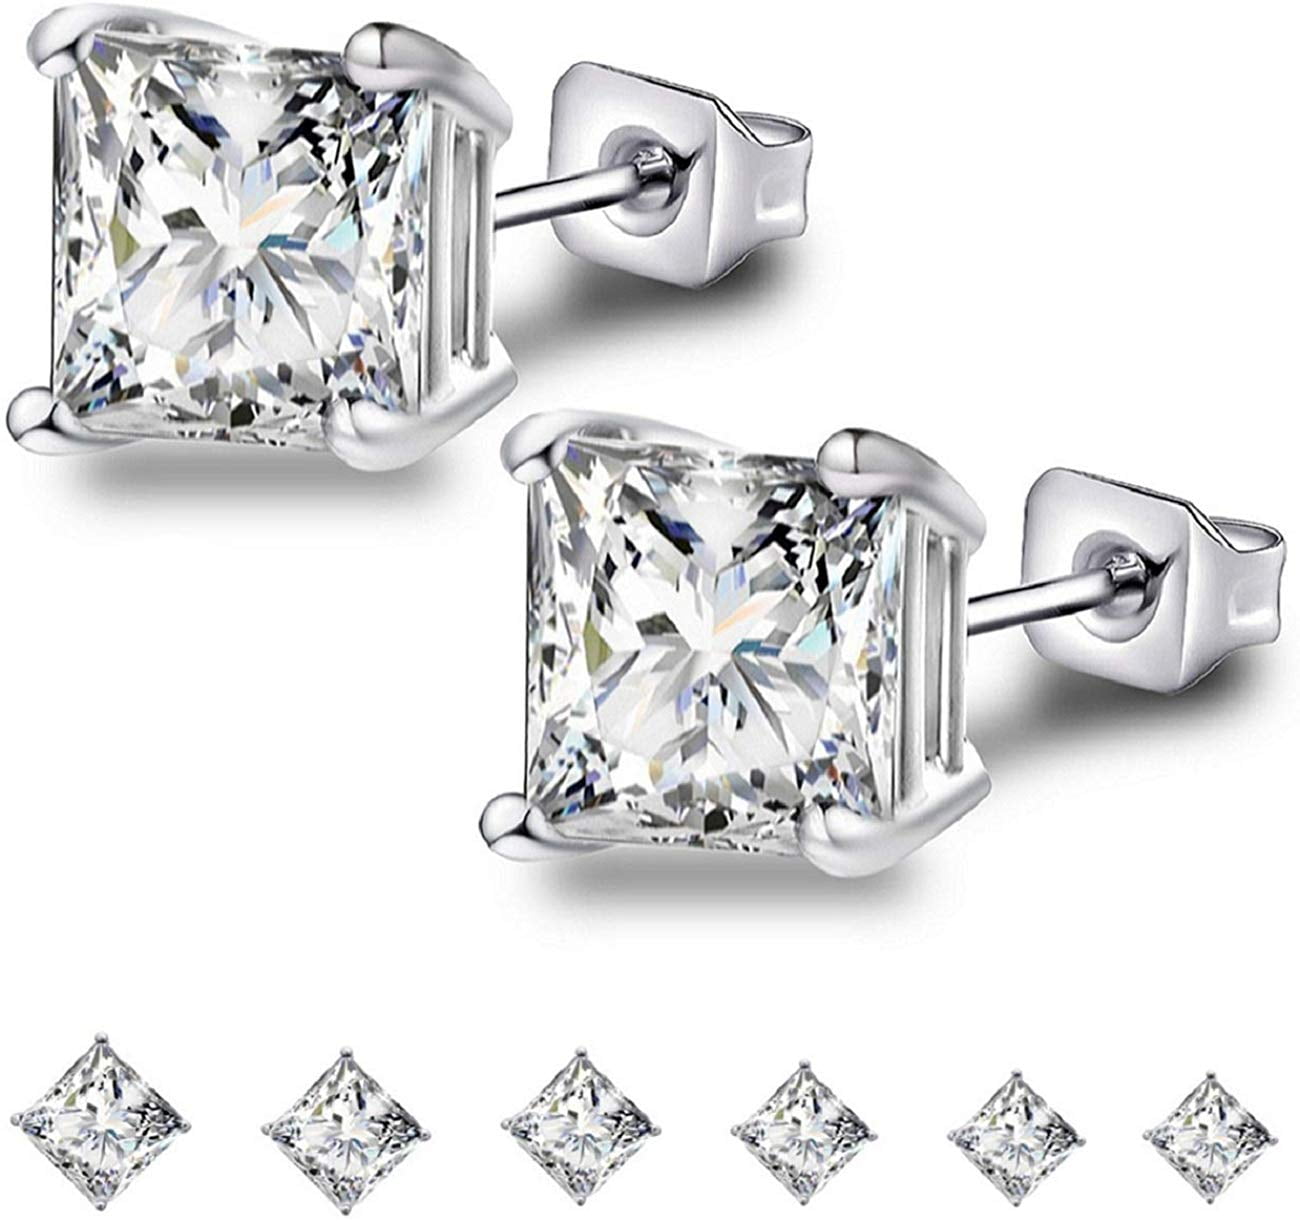 PAIR 3mm 8mm 925 Sterling Silver 18K Gold Plated Square Prong Set CZ Earrings 